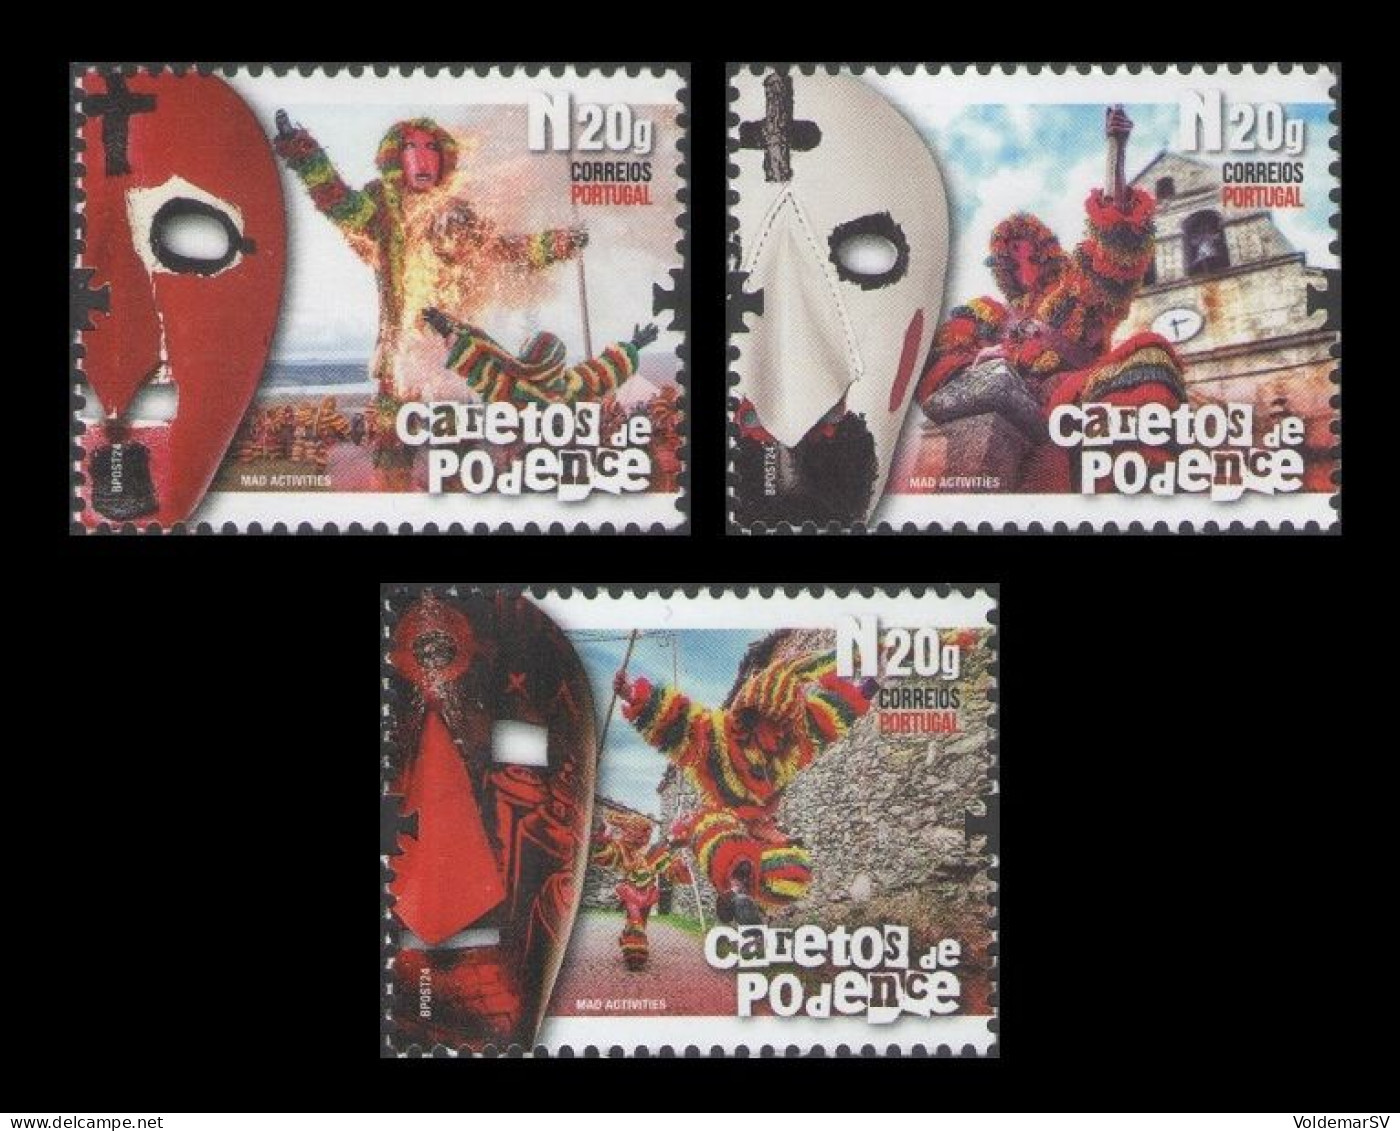 Portugal 2024 Mih. 4938/40 Podence Carnival. Caretos De Podence MNH ** - Unused Stamps